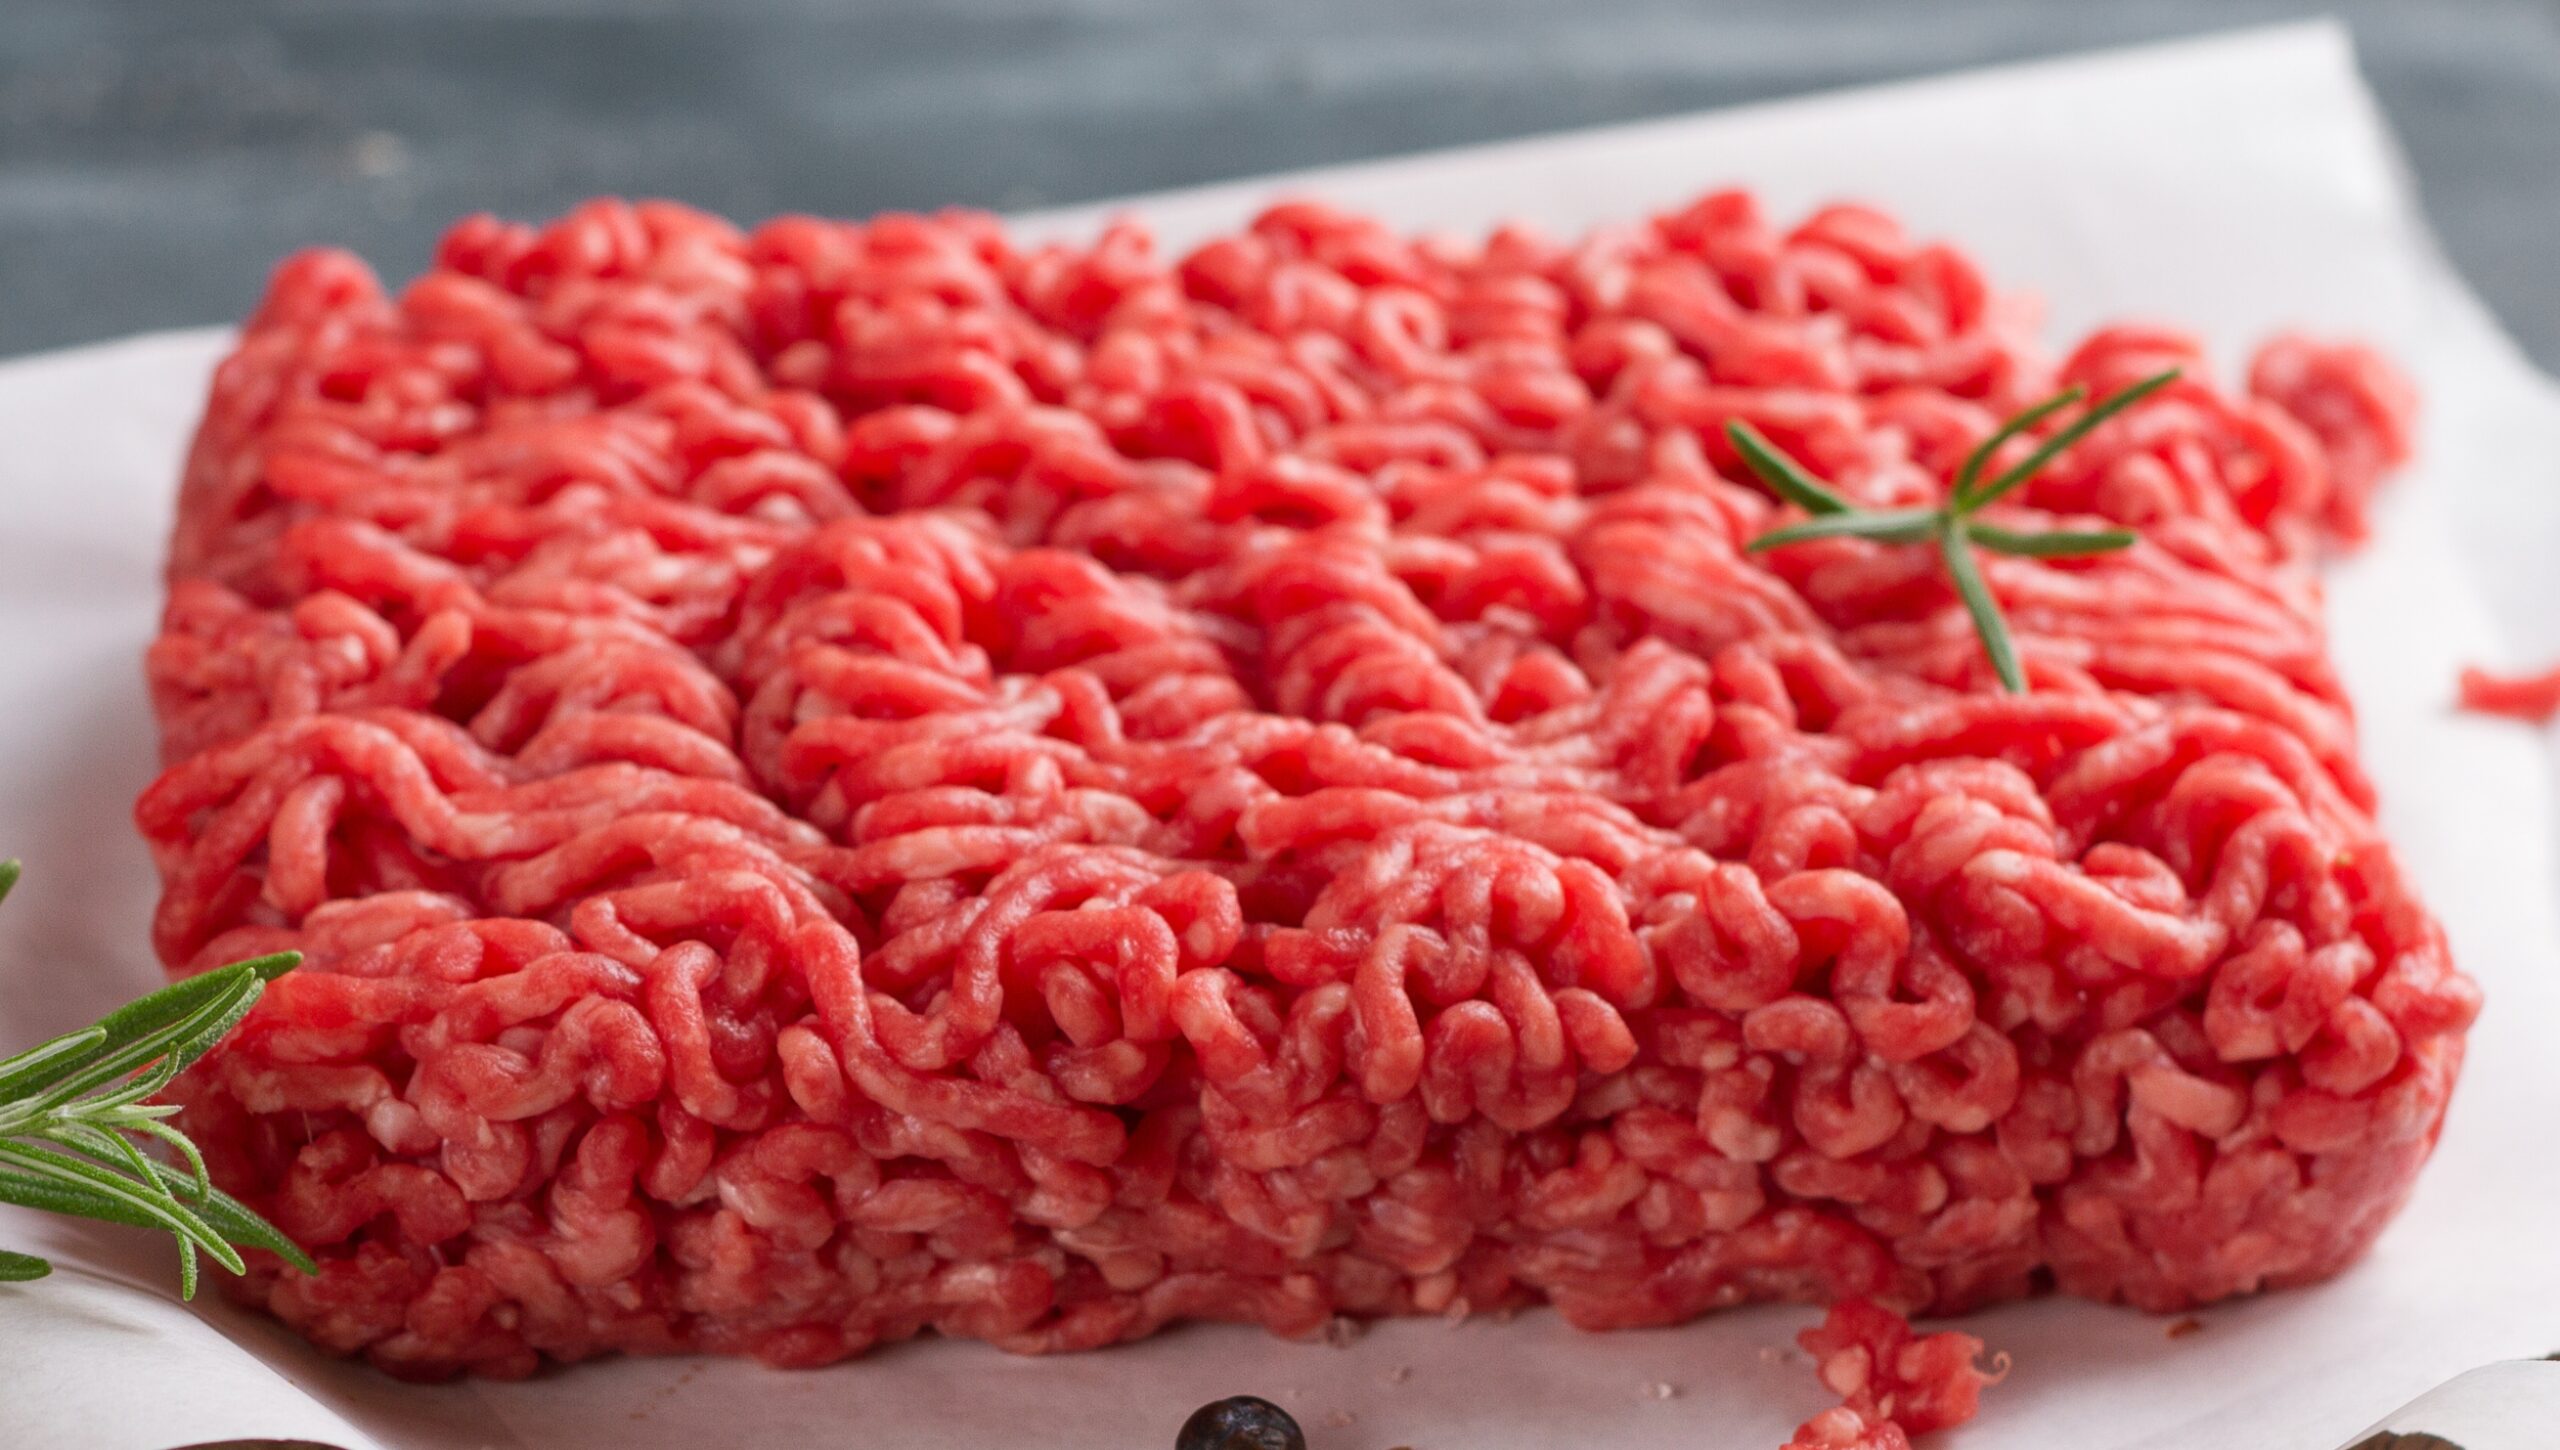 What’s in ground beef? Penn State Meat Scientist Answers Your Ground ...